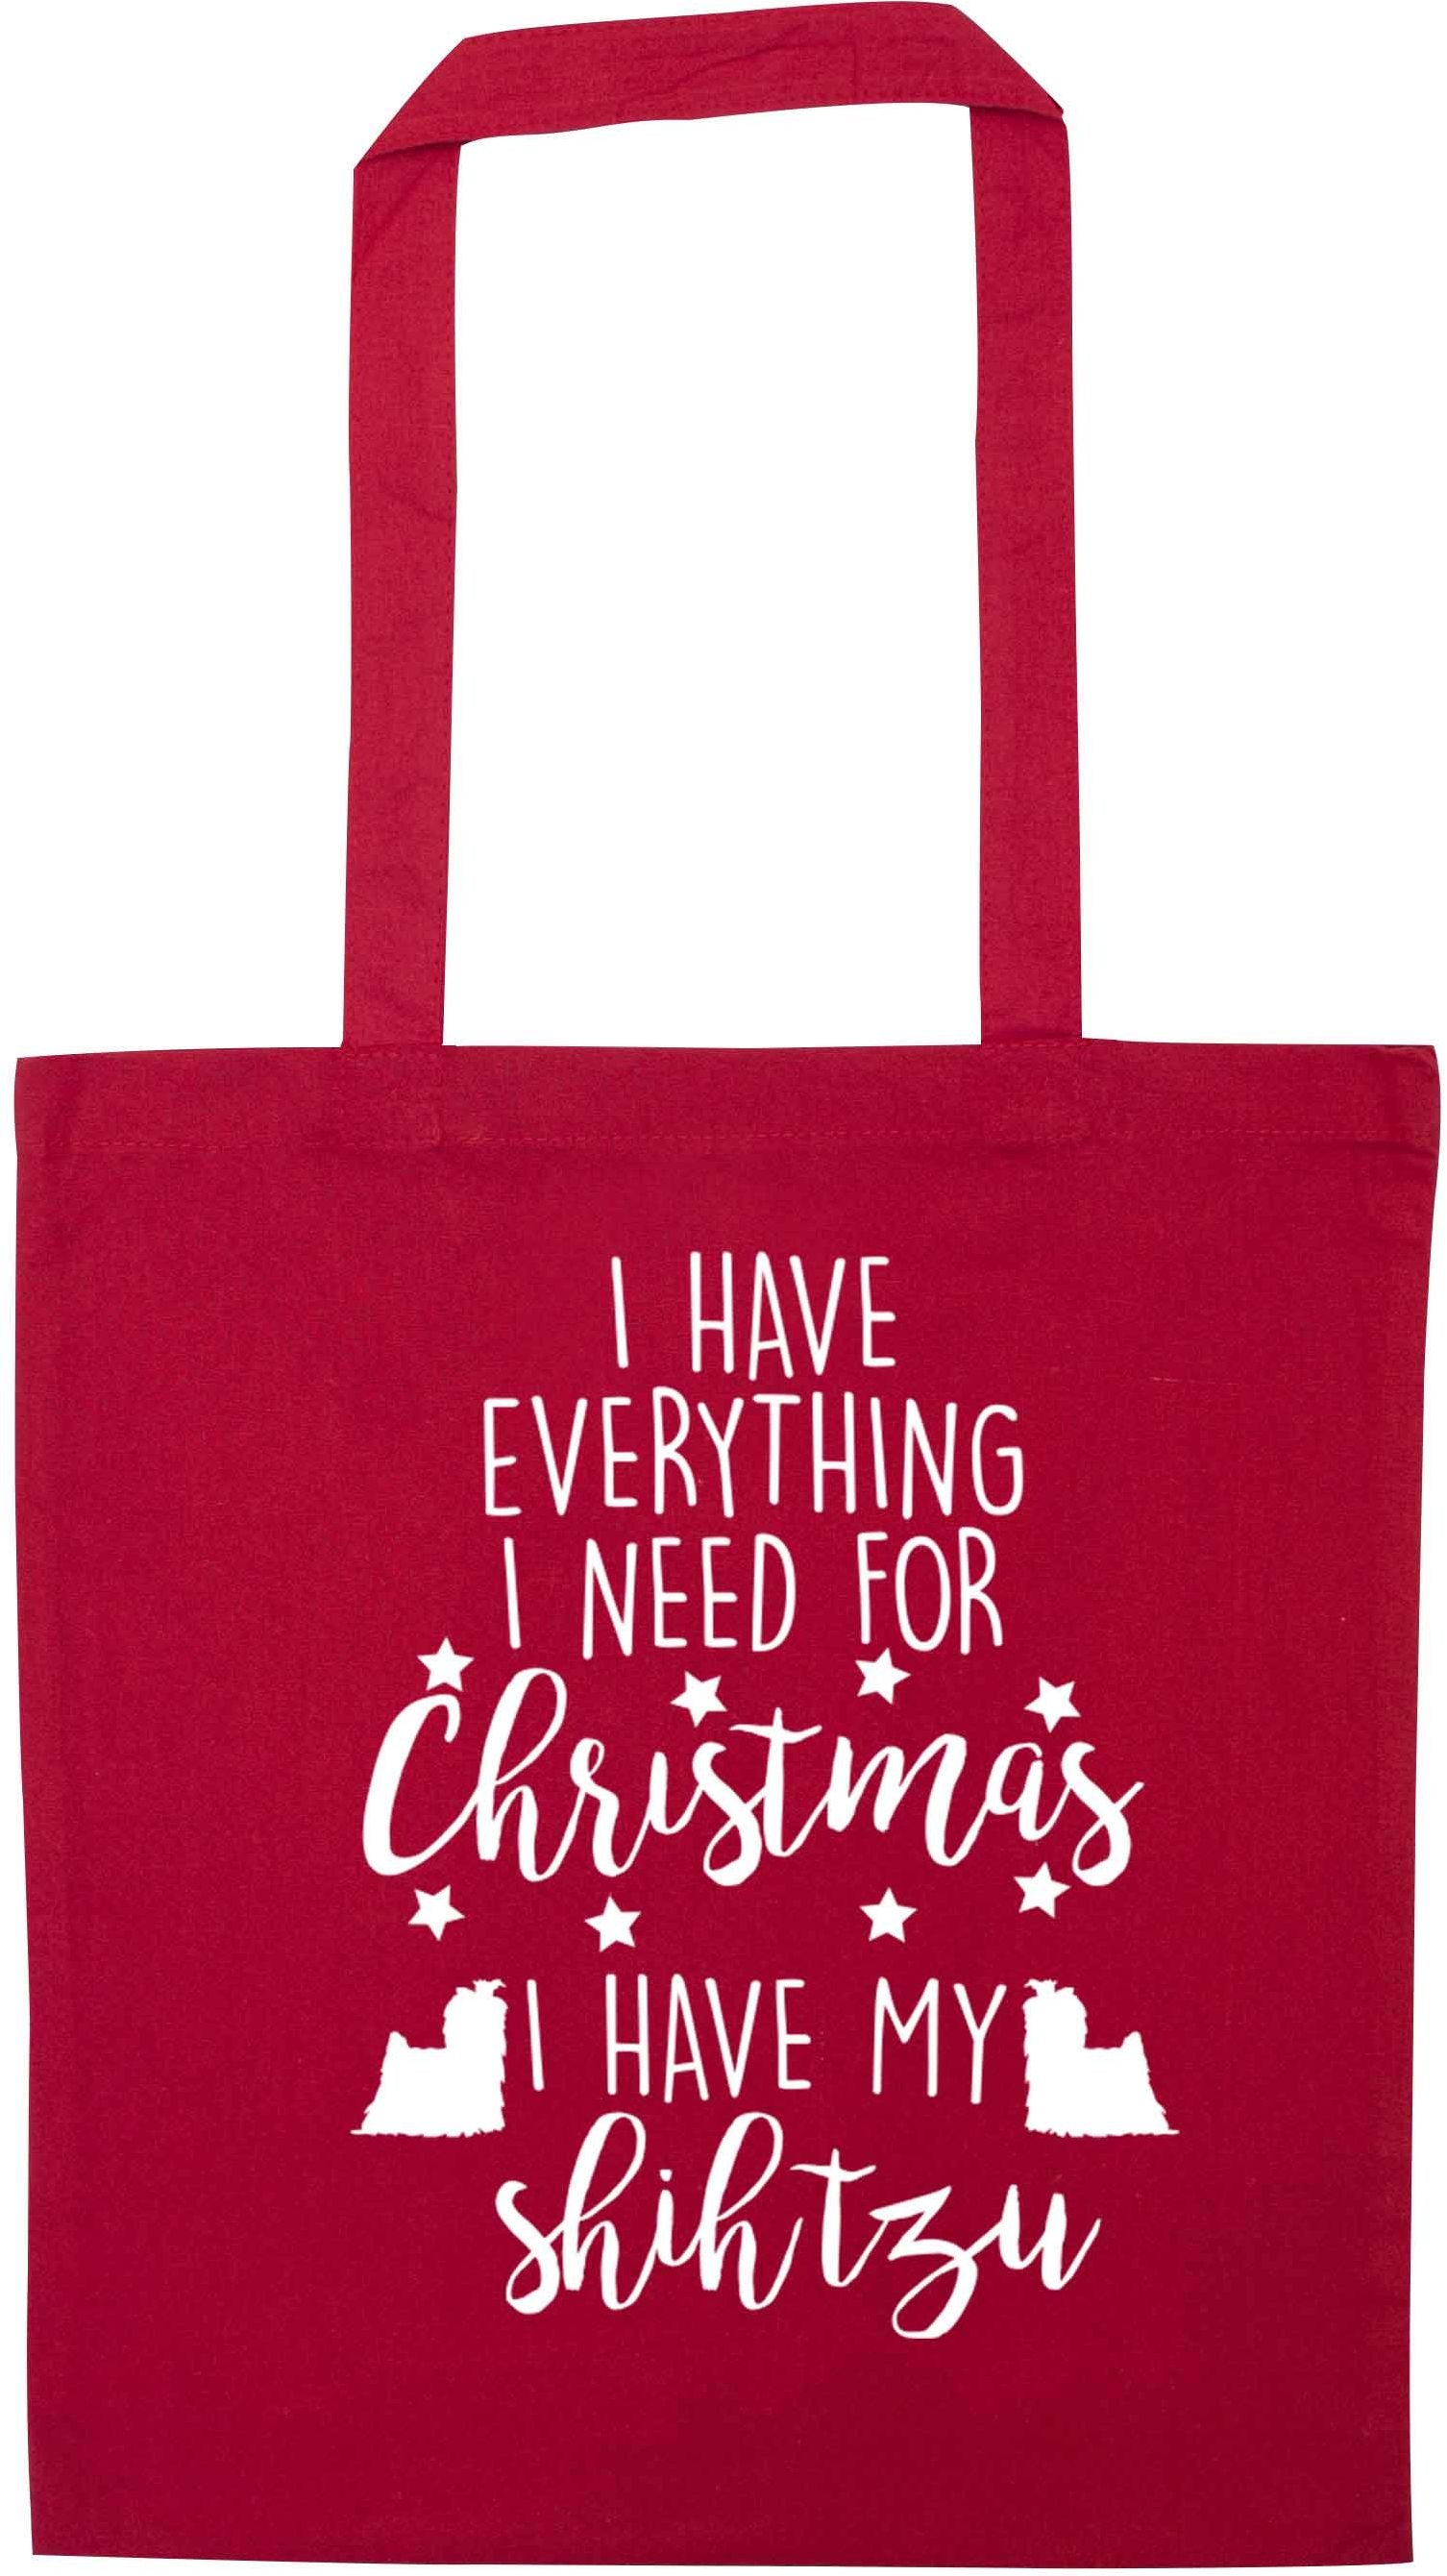 I have everything I need for Christmas I have my shih tzu red tote bag